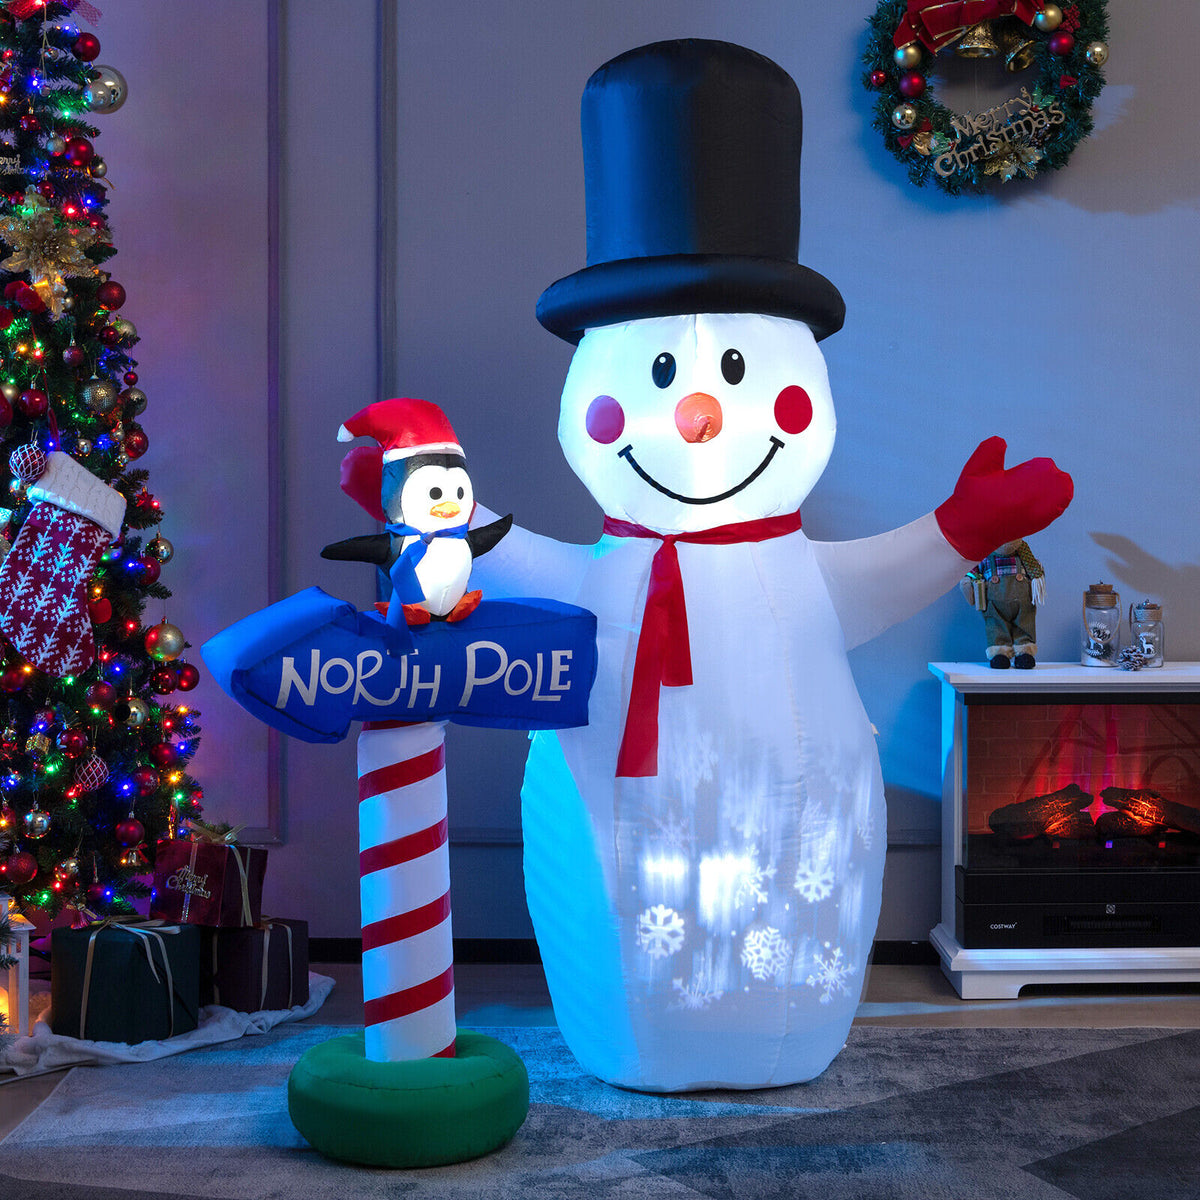 Outdoor Giant Christmas Snowman with Penguin Guidepost Inflatable Decoration